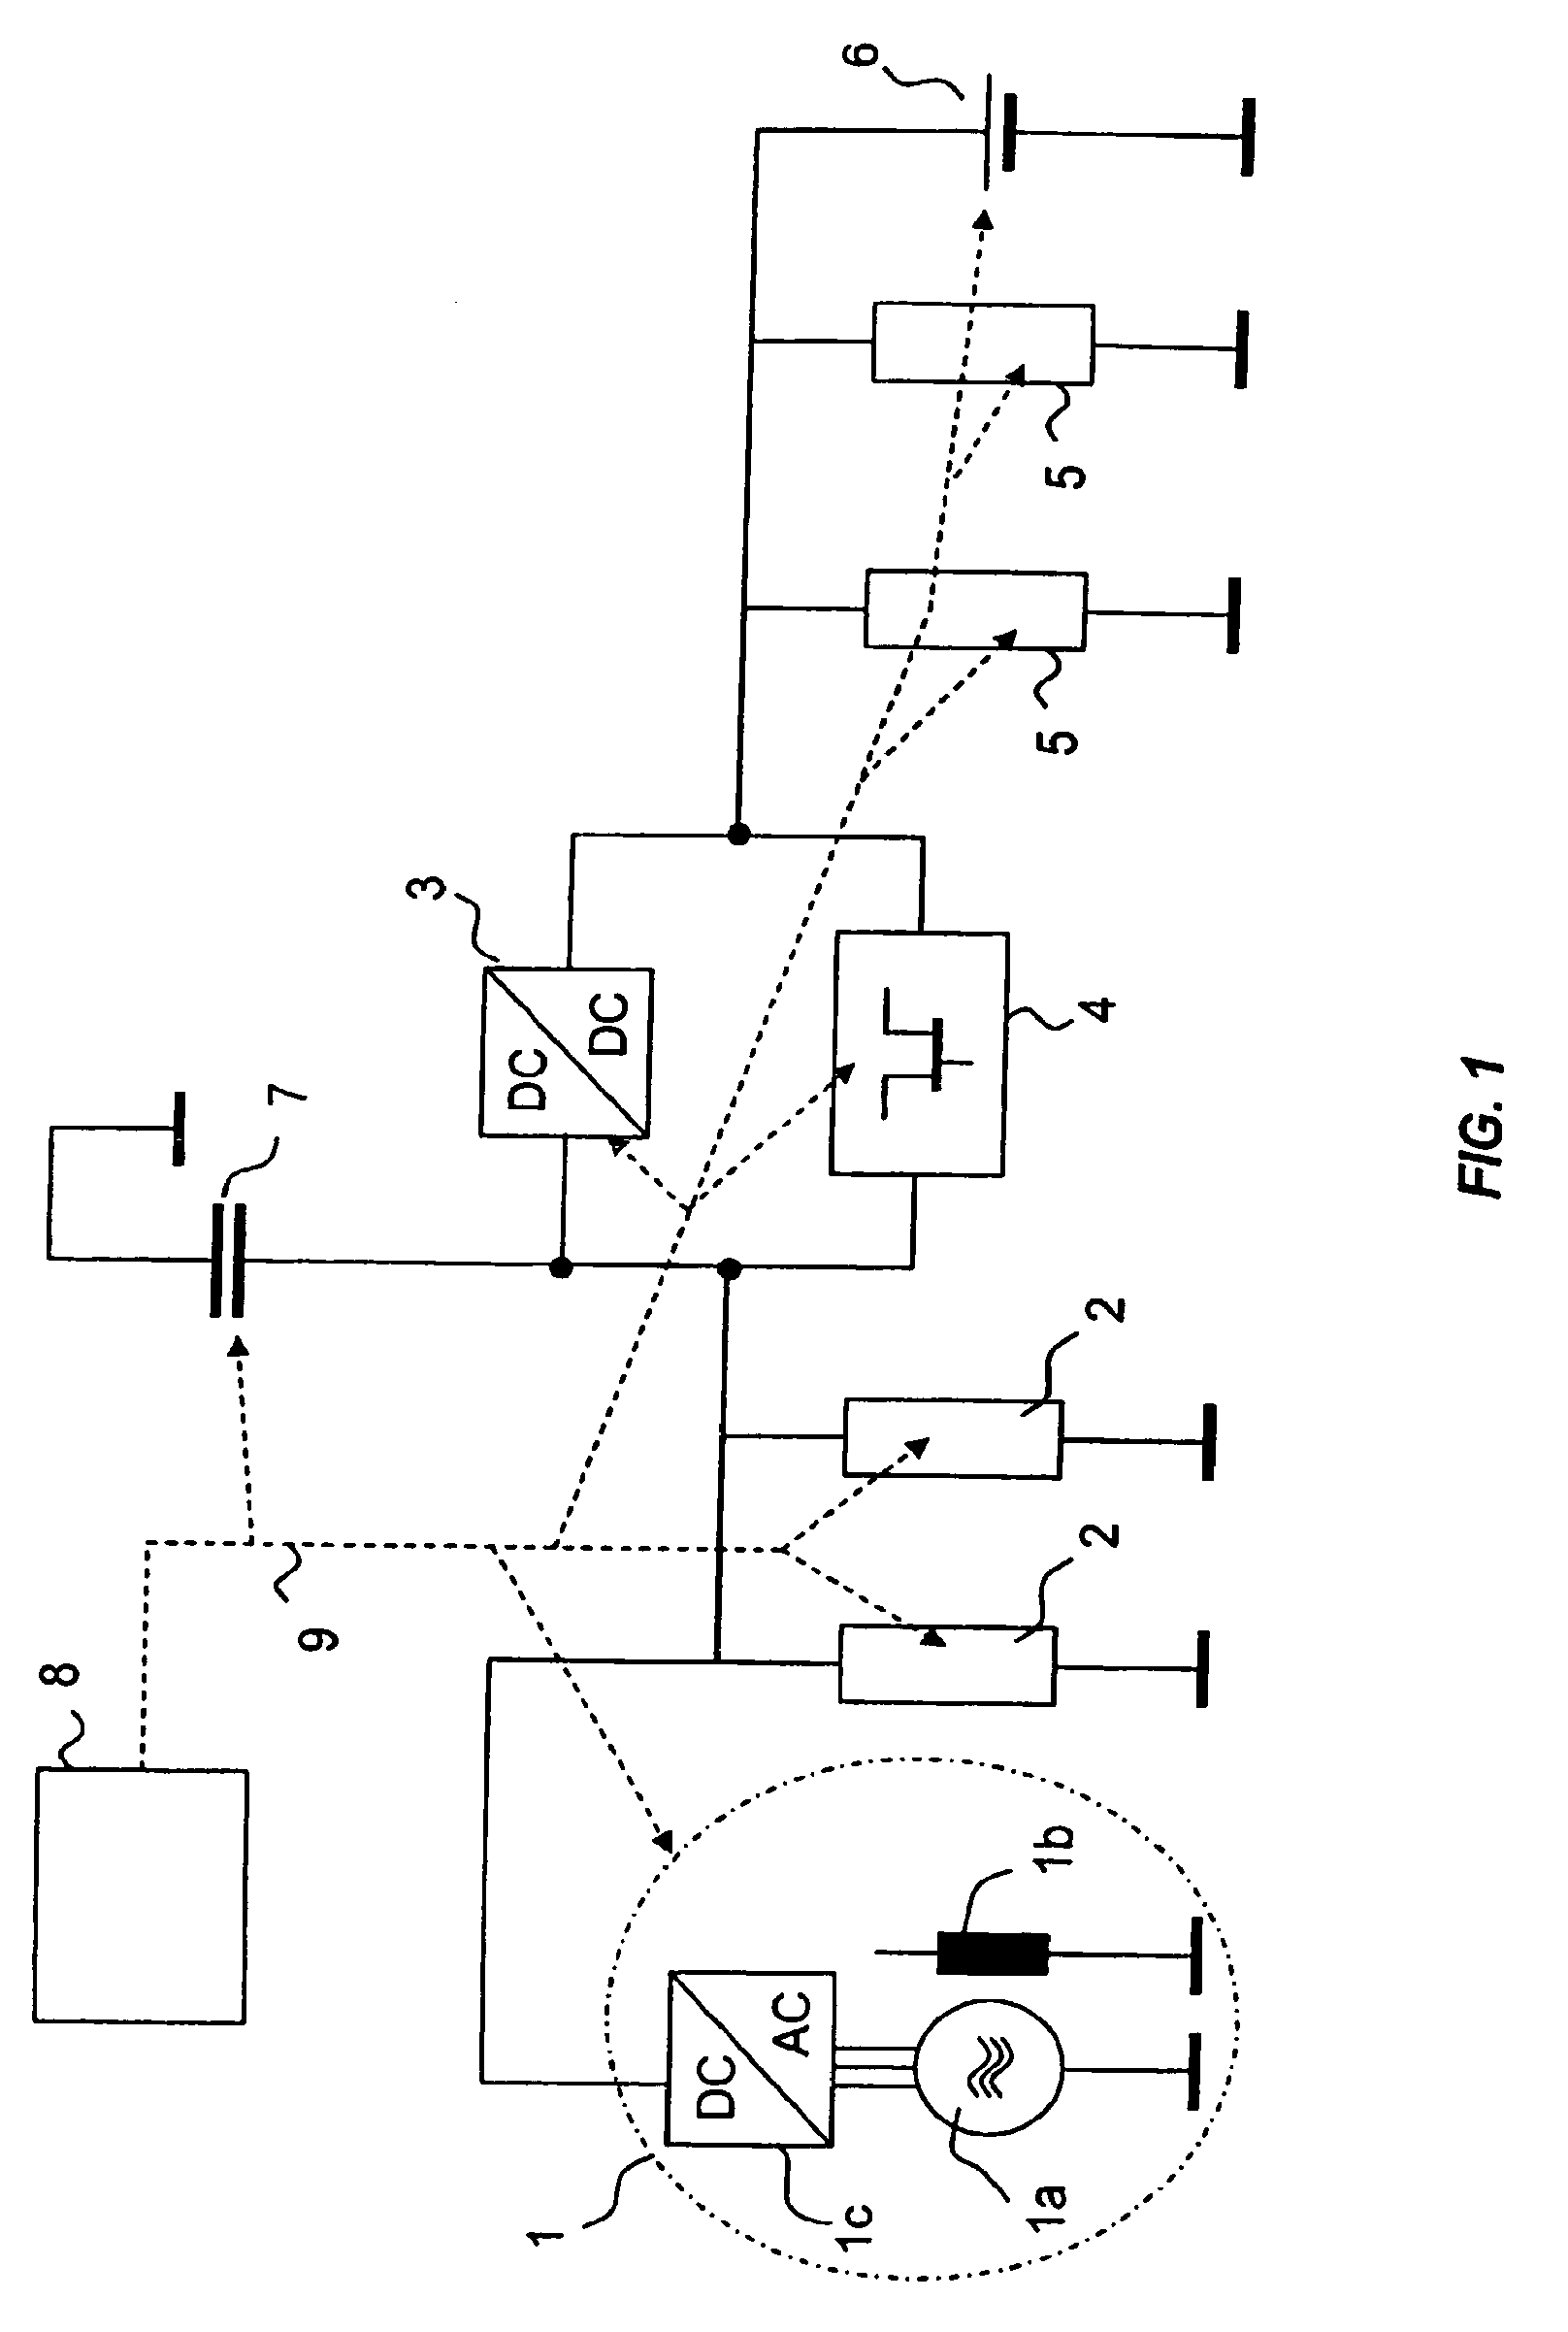 Method of controlling an onboard power supply system for a motor vehicle